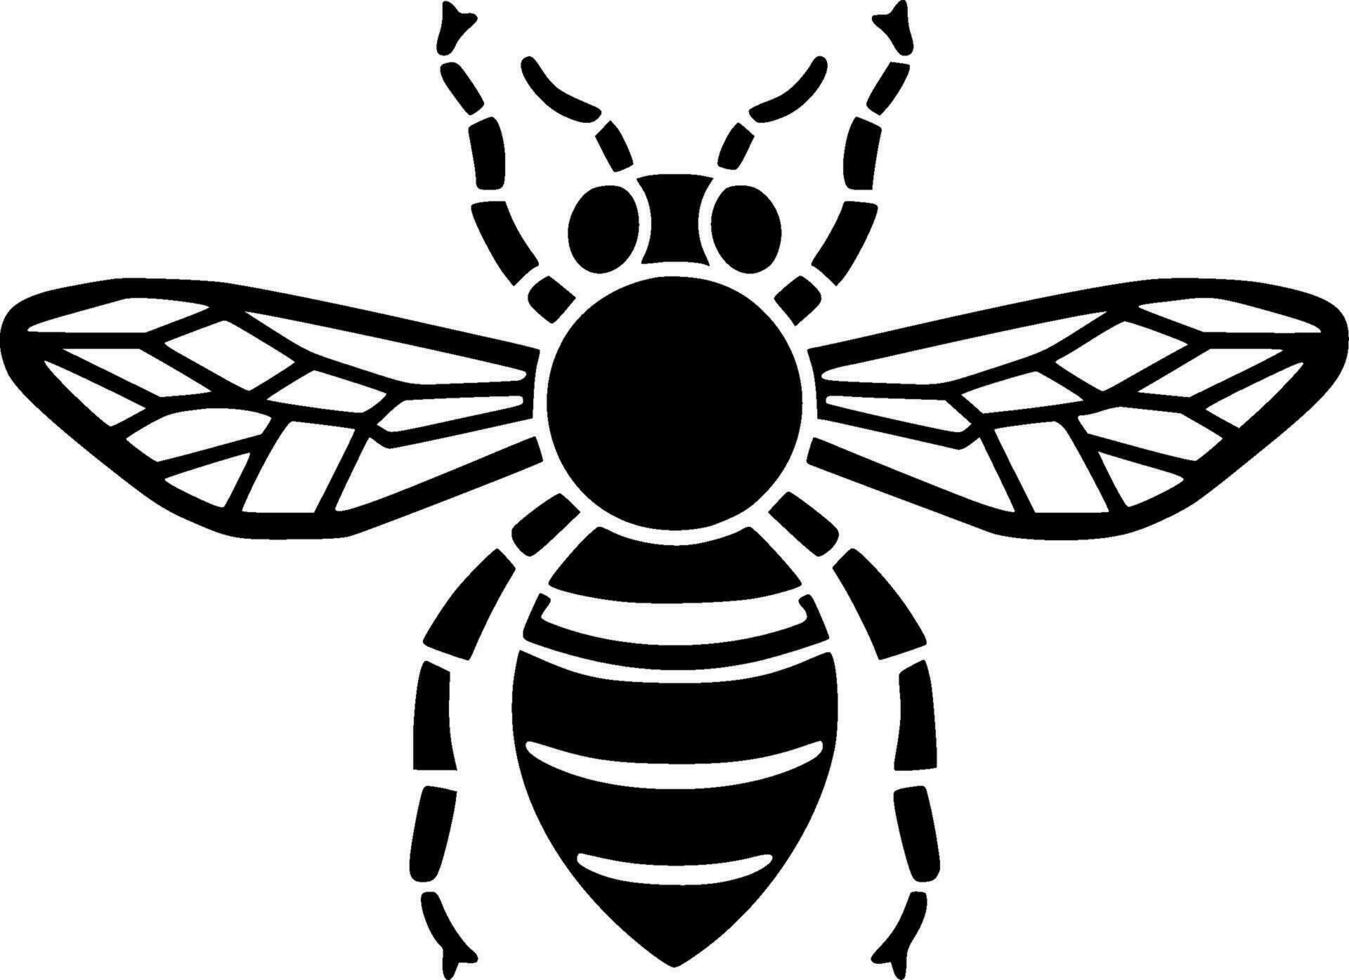 Bee, Black and White Vector illustration